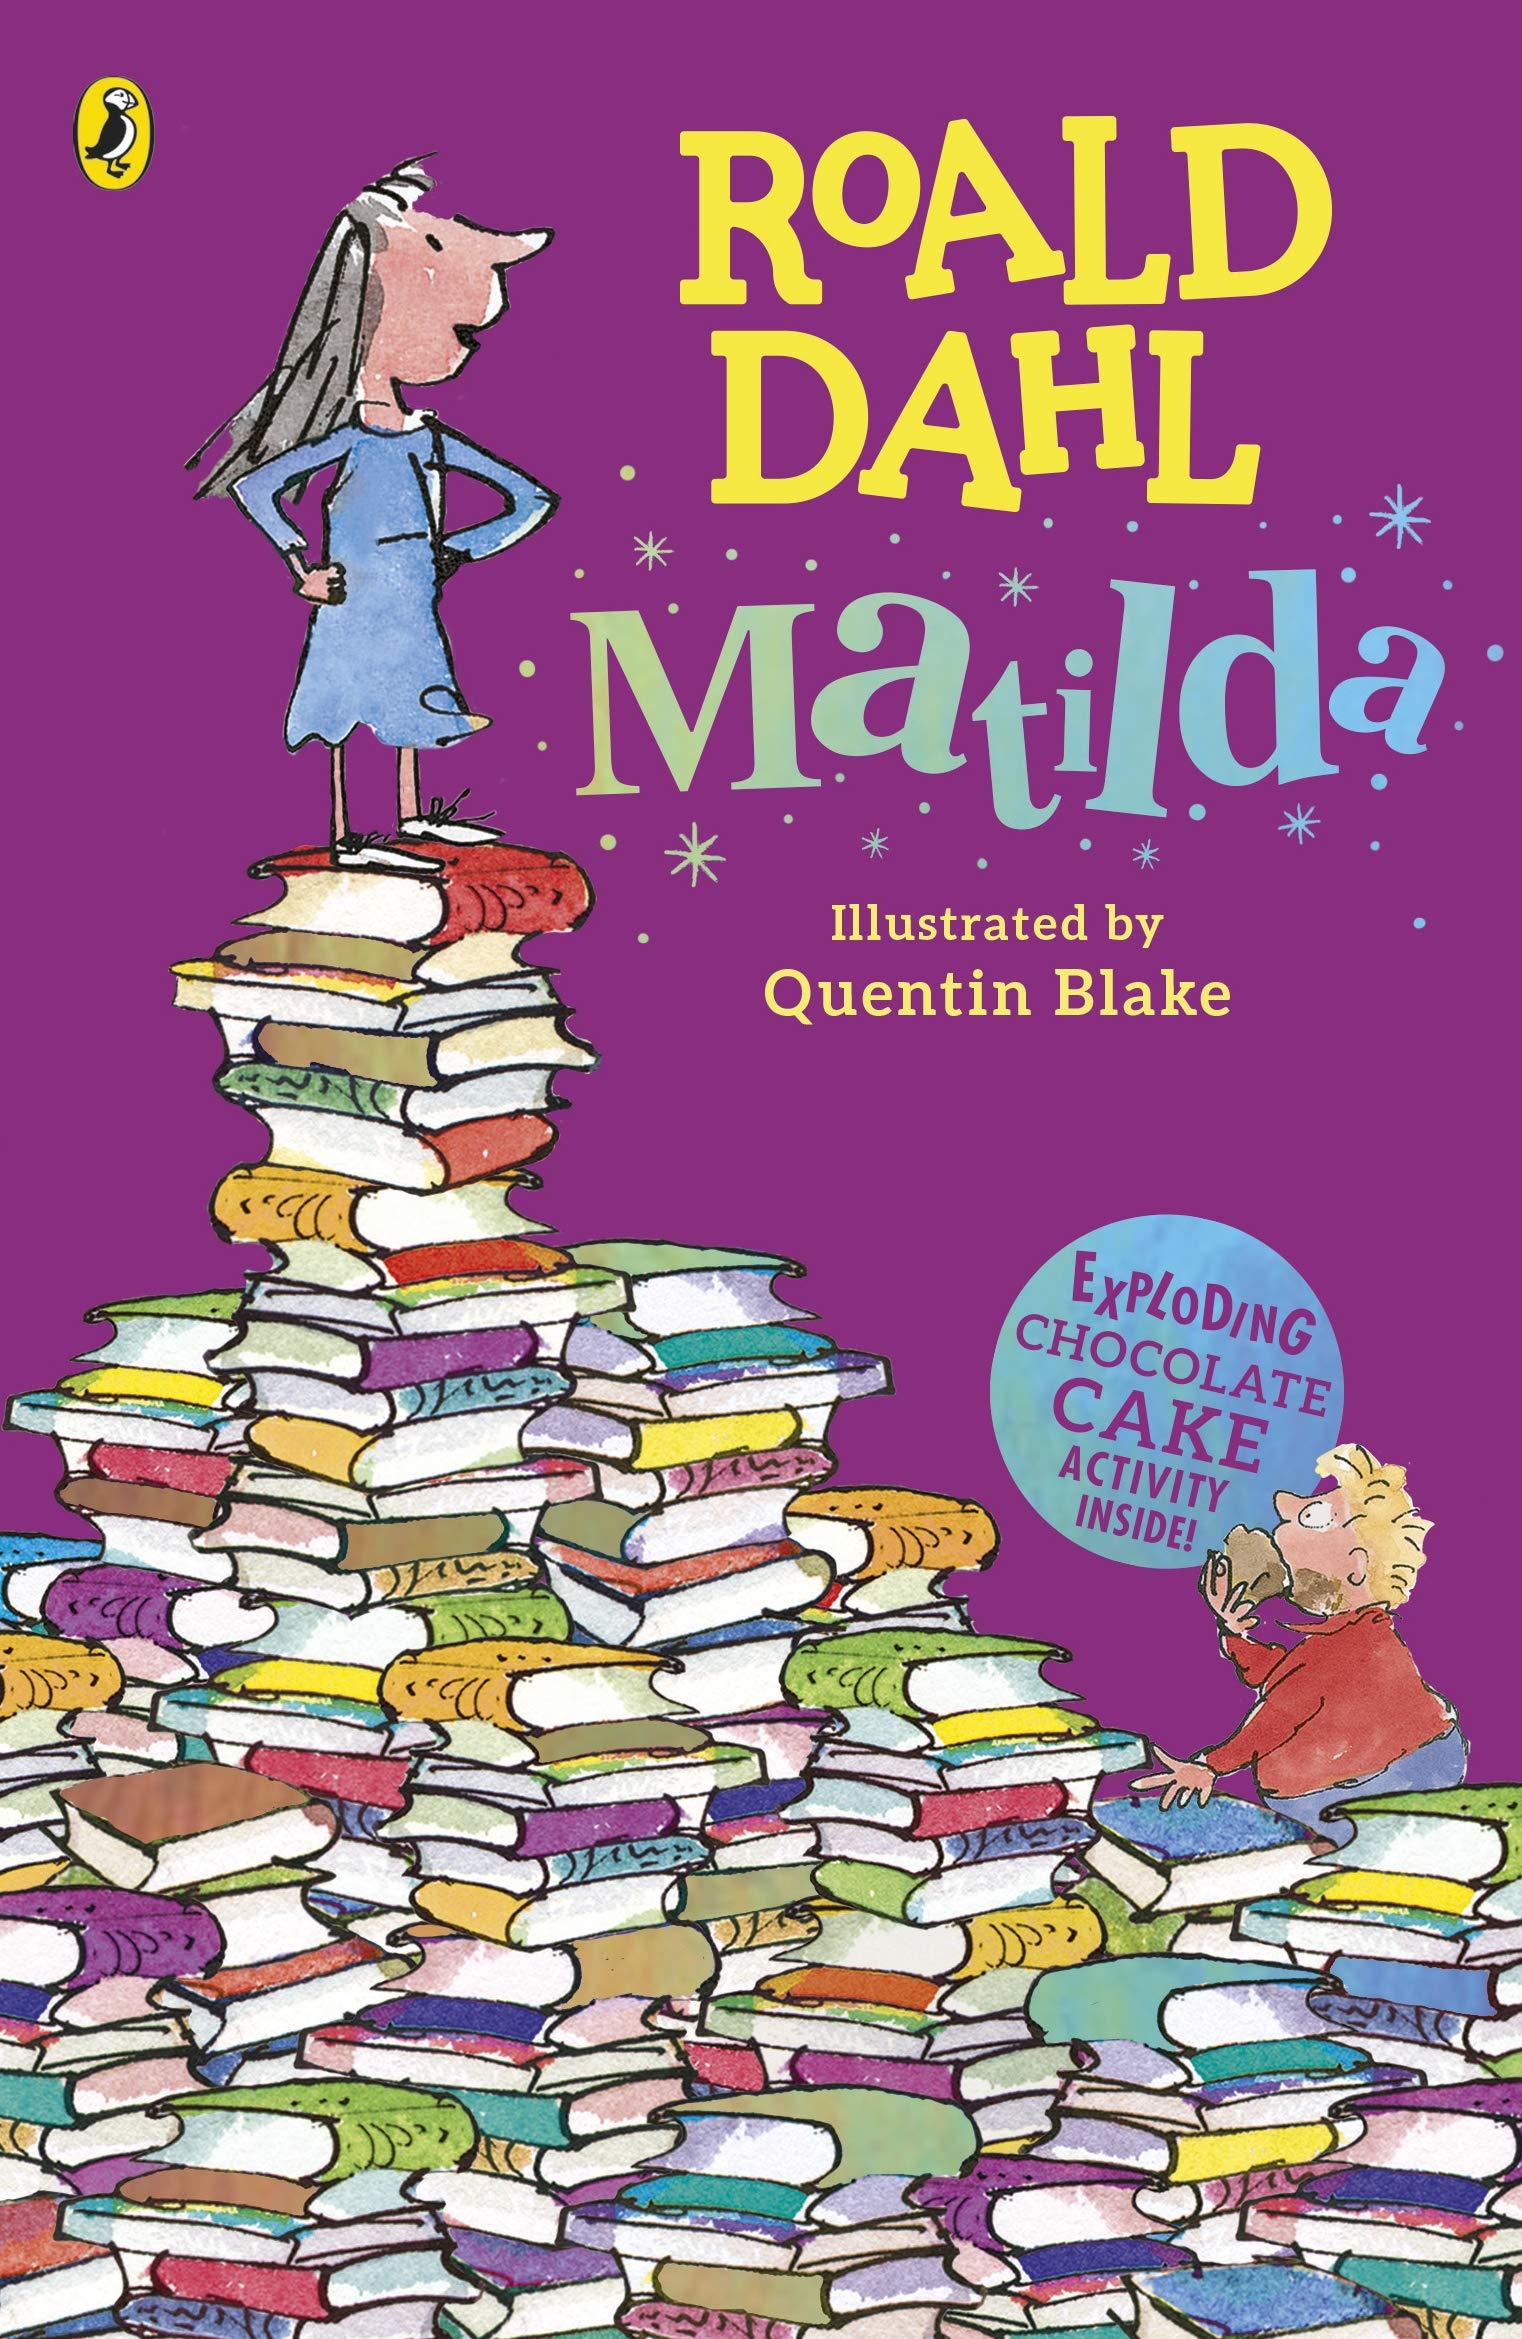 See Matilda in Library Catalog